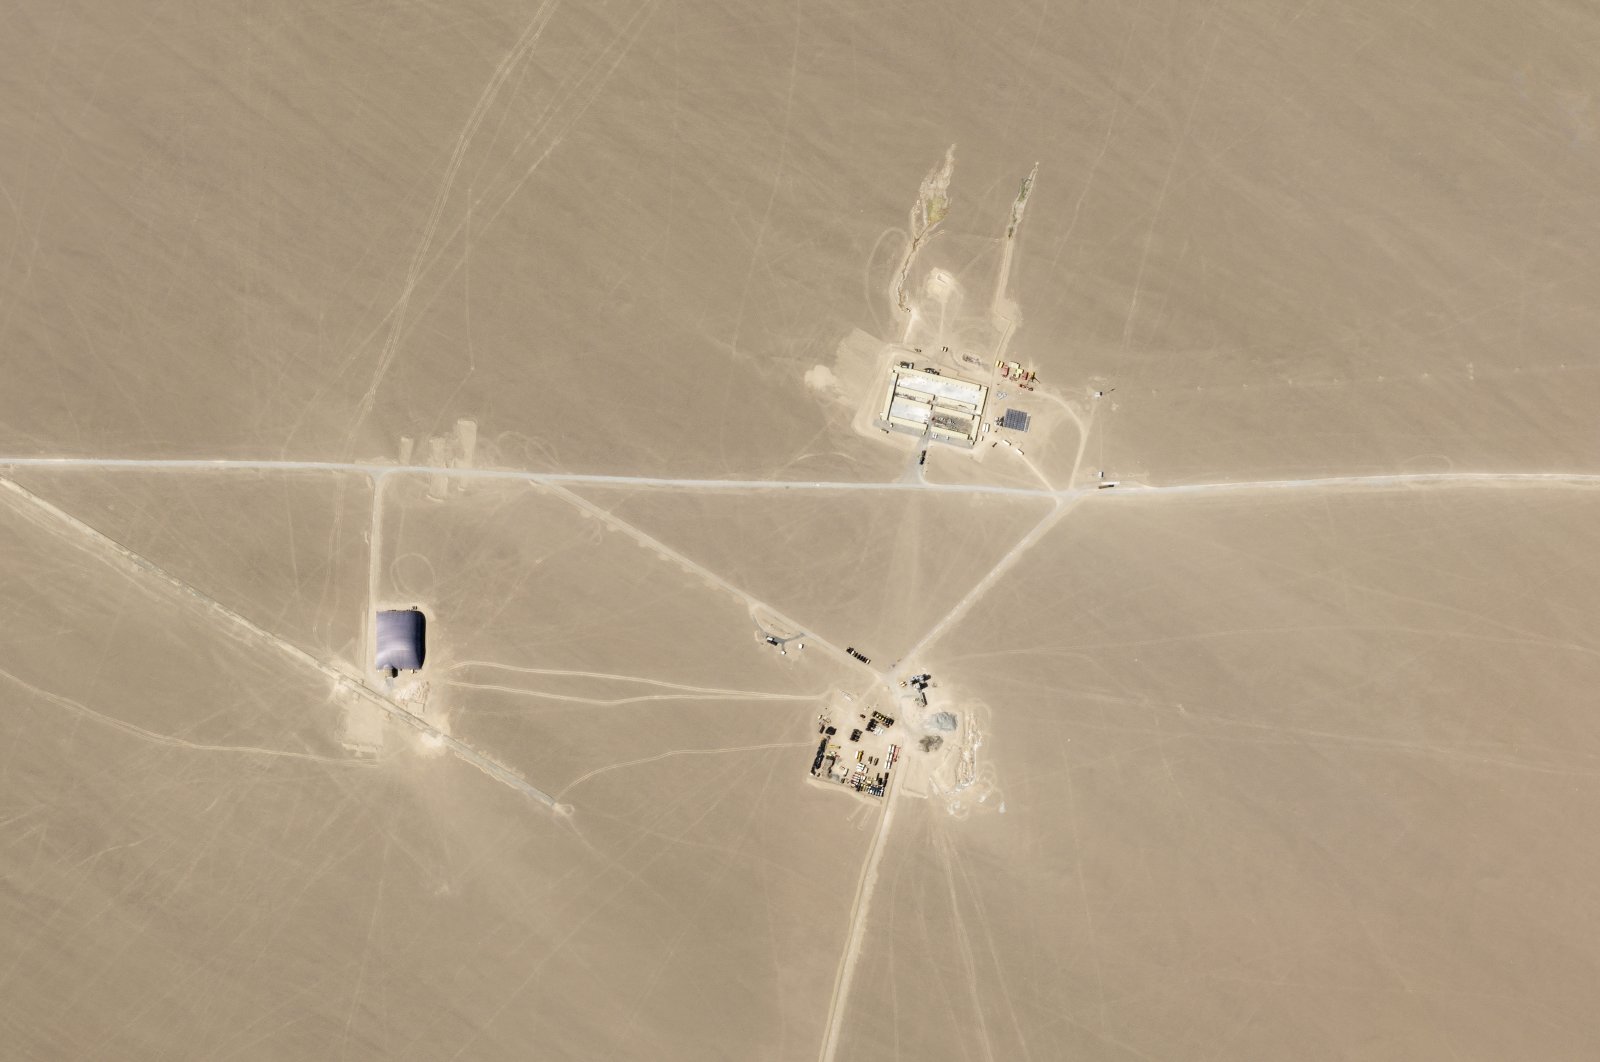 This satellite image shows what analysts believe is construction on an intercontinental ballistic missile silo near Hami, China, July 25, 2021. (Planet Labs Inc. via AP)